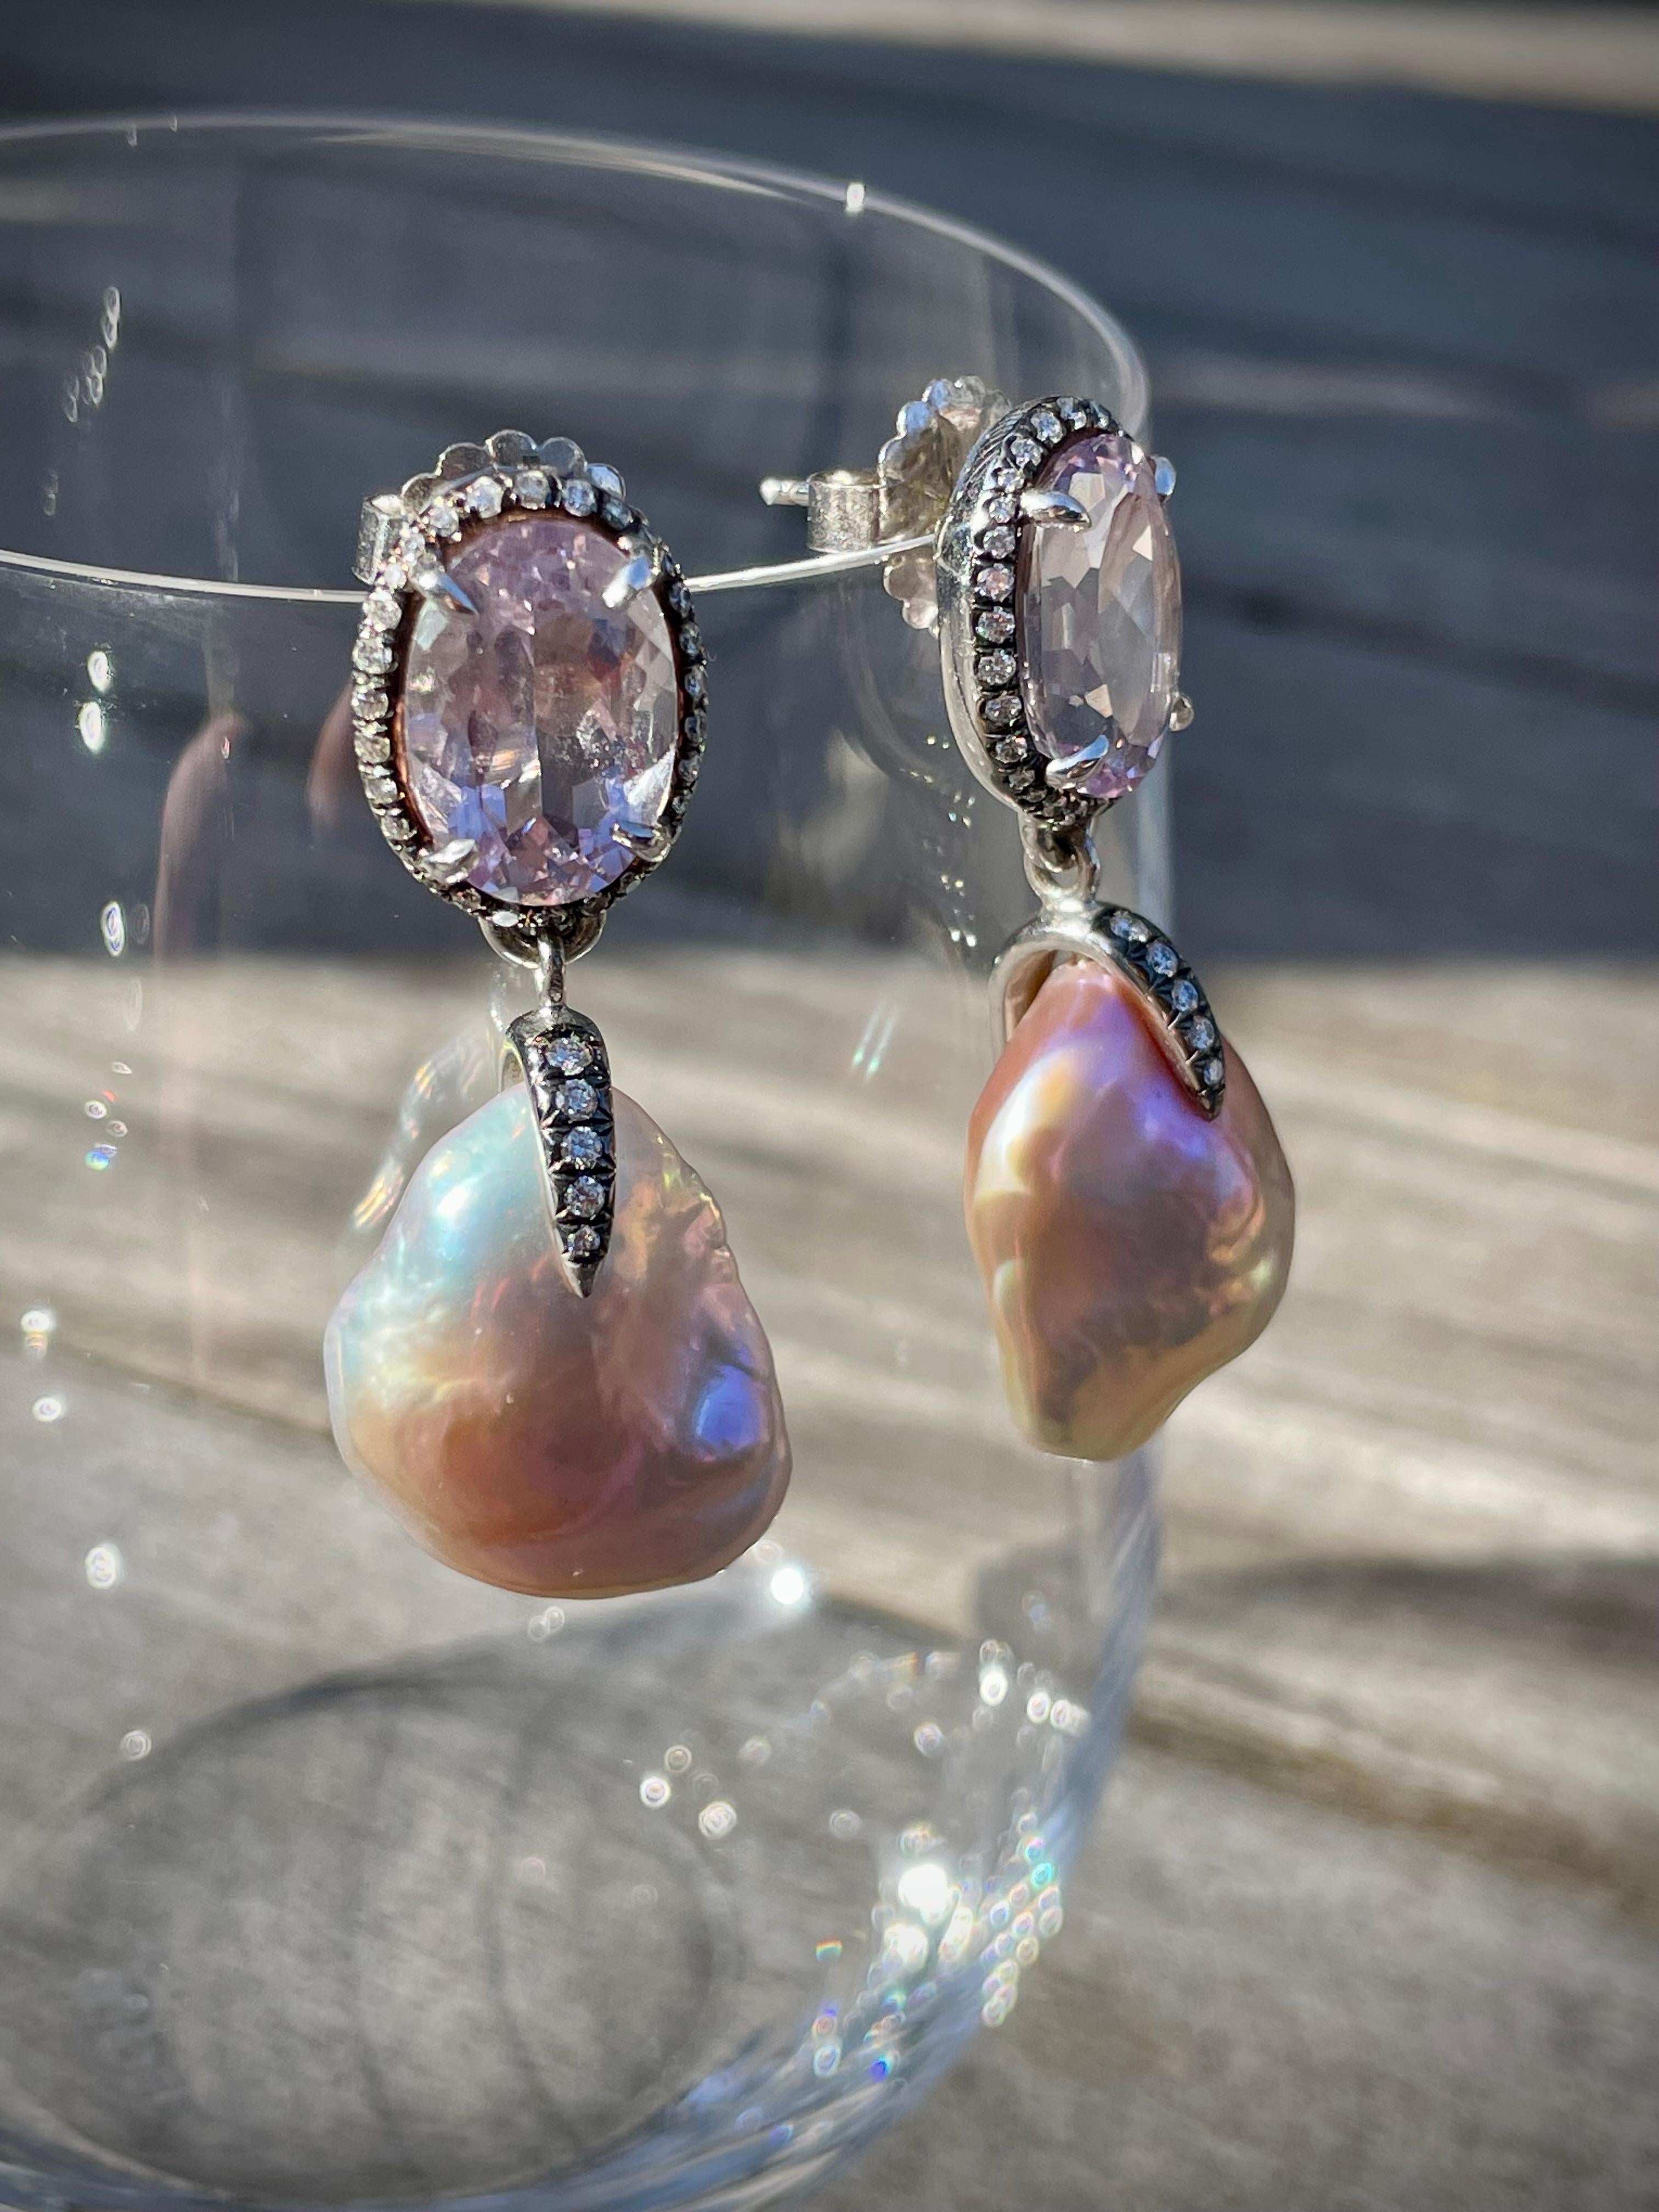 Over 7 carats of faceted oval Rose de France sit on the ear surrounded by diamond halos. Soufflé freshwater pearls with an intensely metallic lavender luster drop below held by a pavé claw. Secure posts and large backs, all set in sterling silver